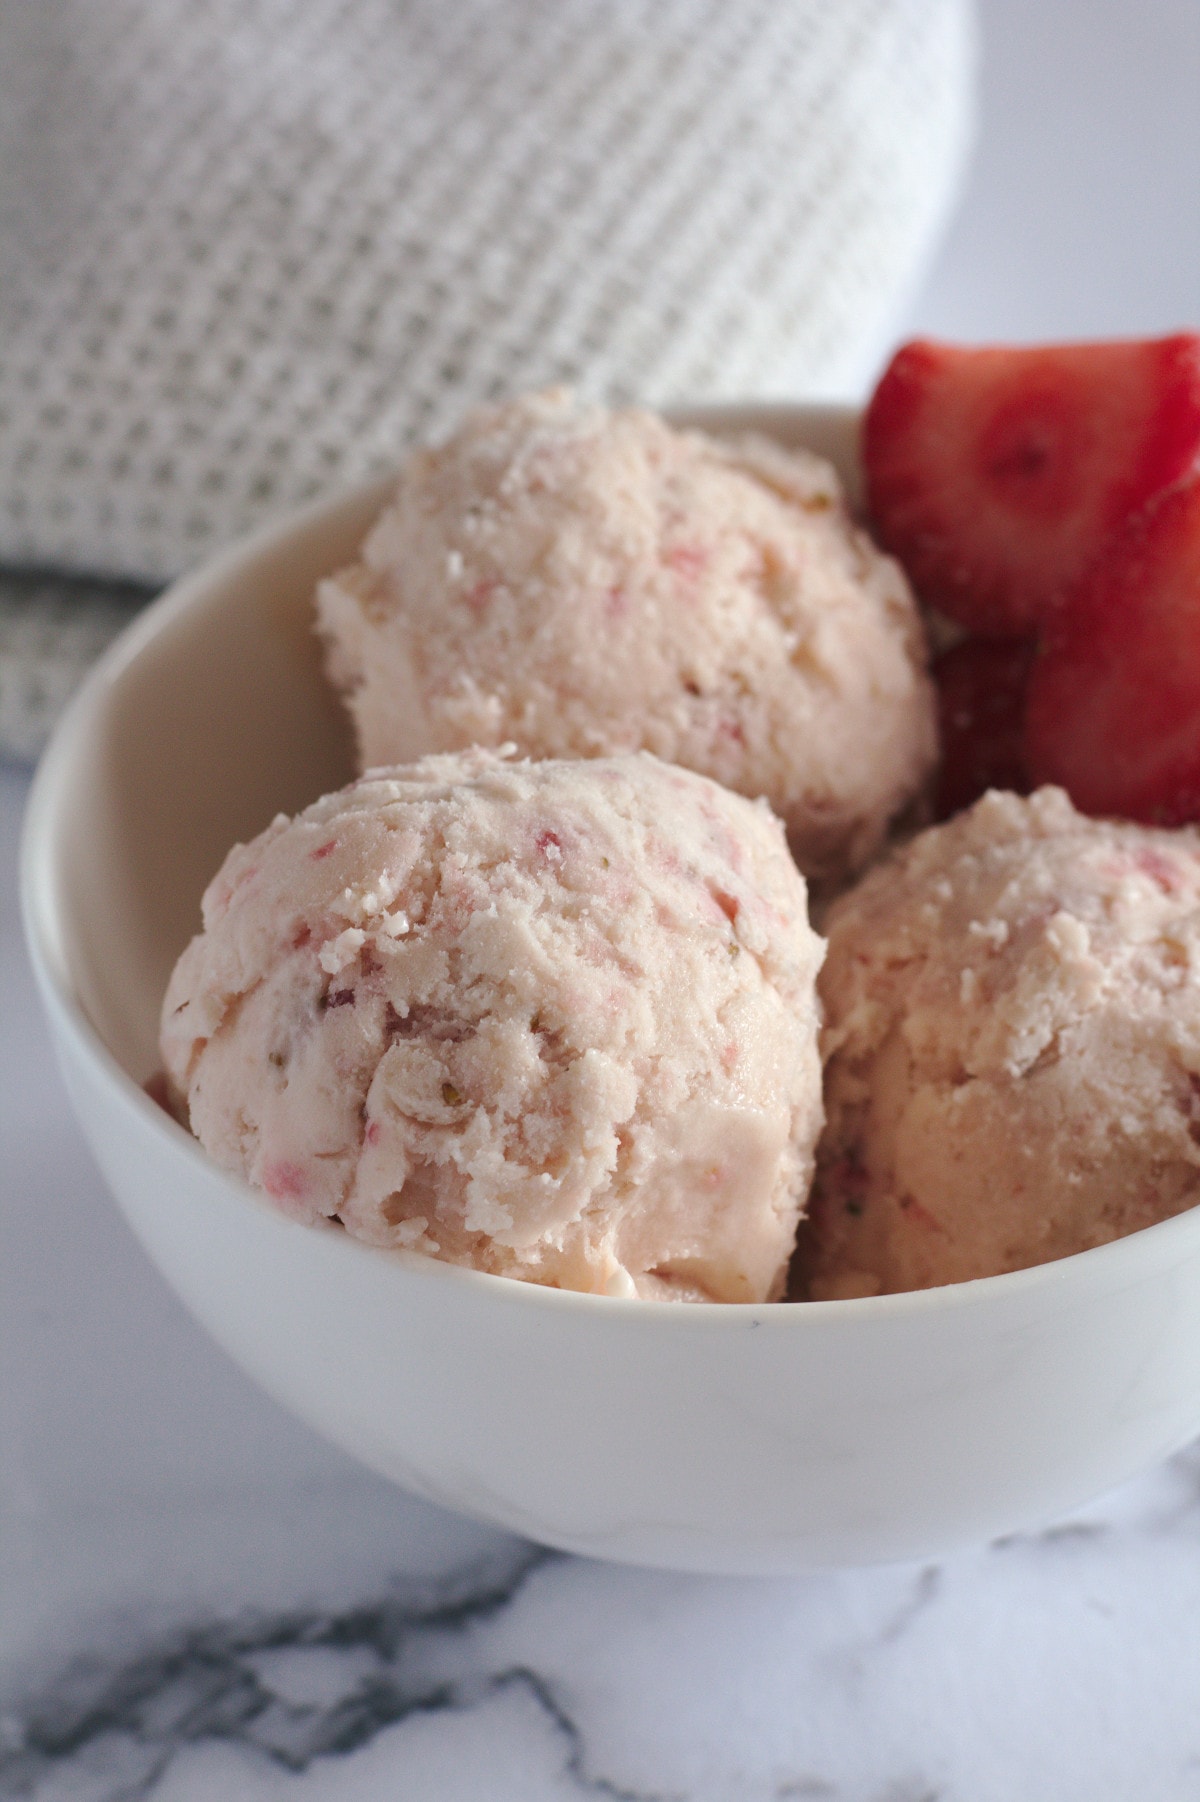 Ice cream in a bowl with some strawberries.